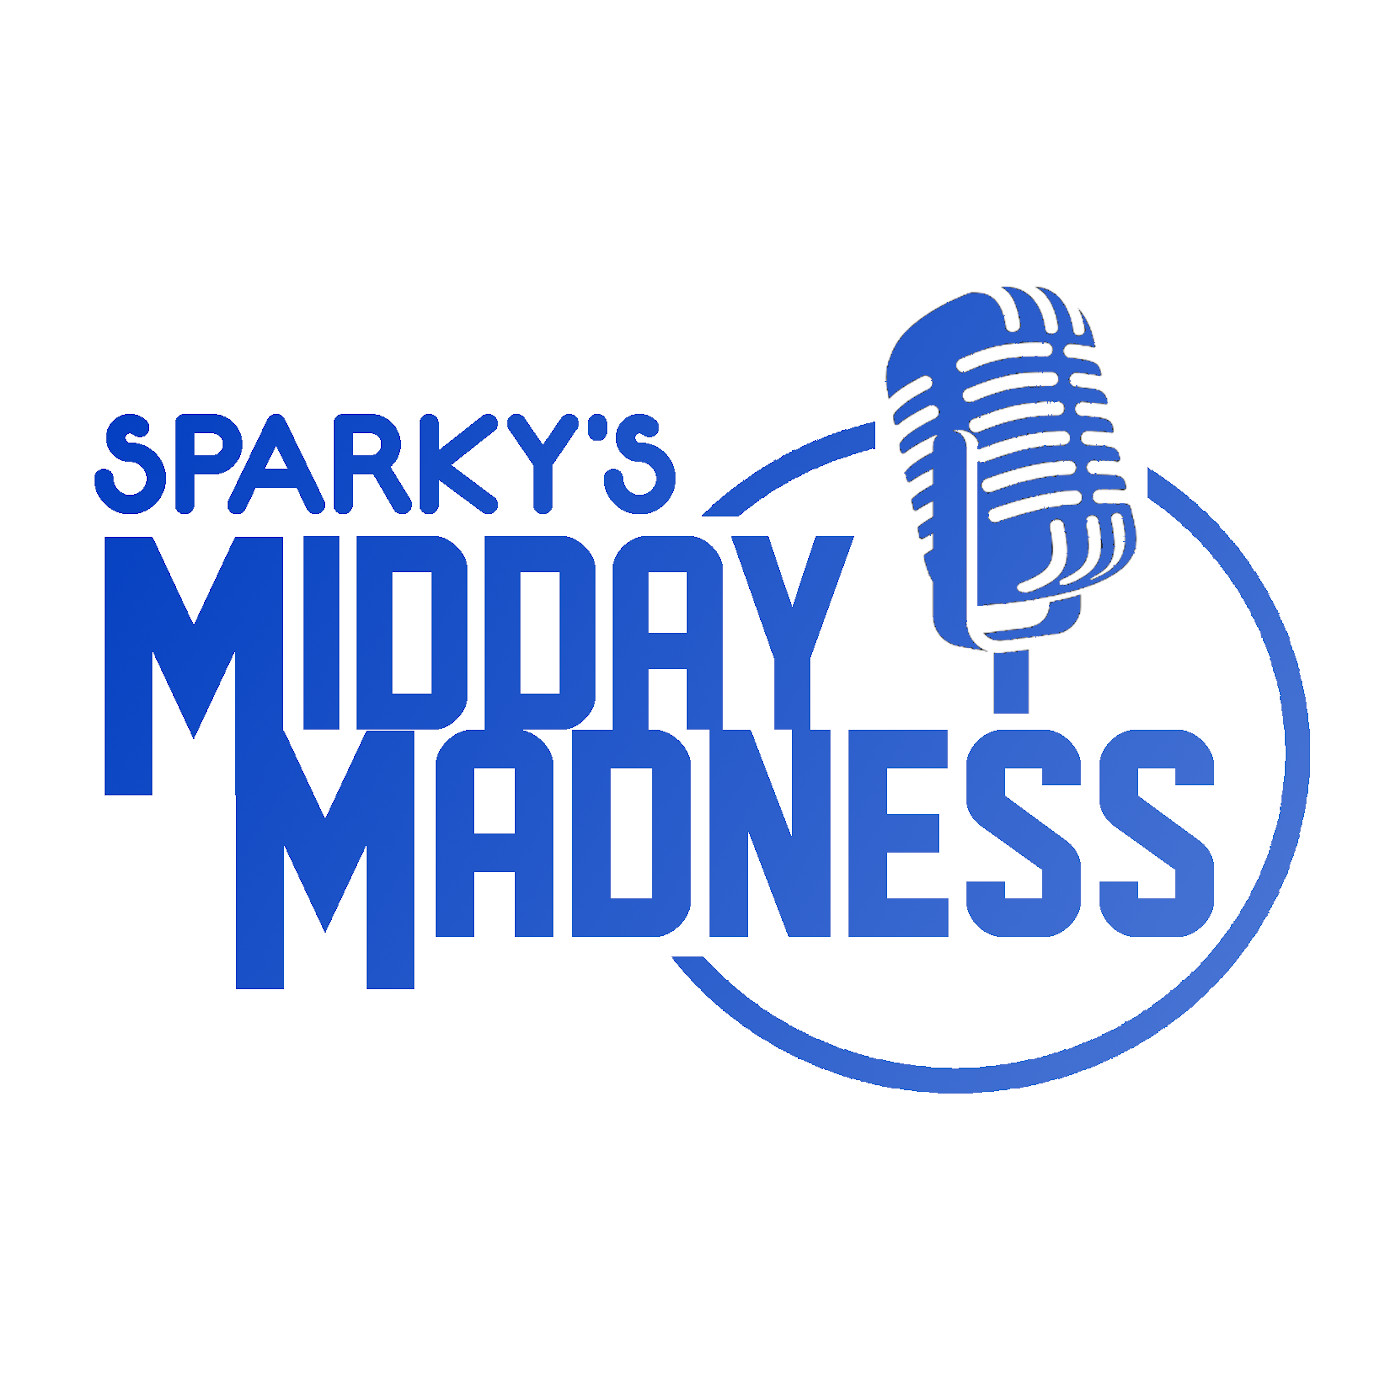 8-9-22 Sparky's Midday Madness